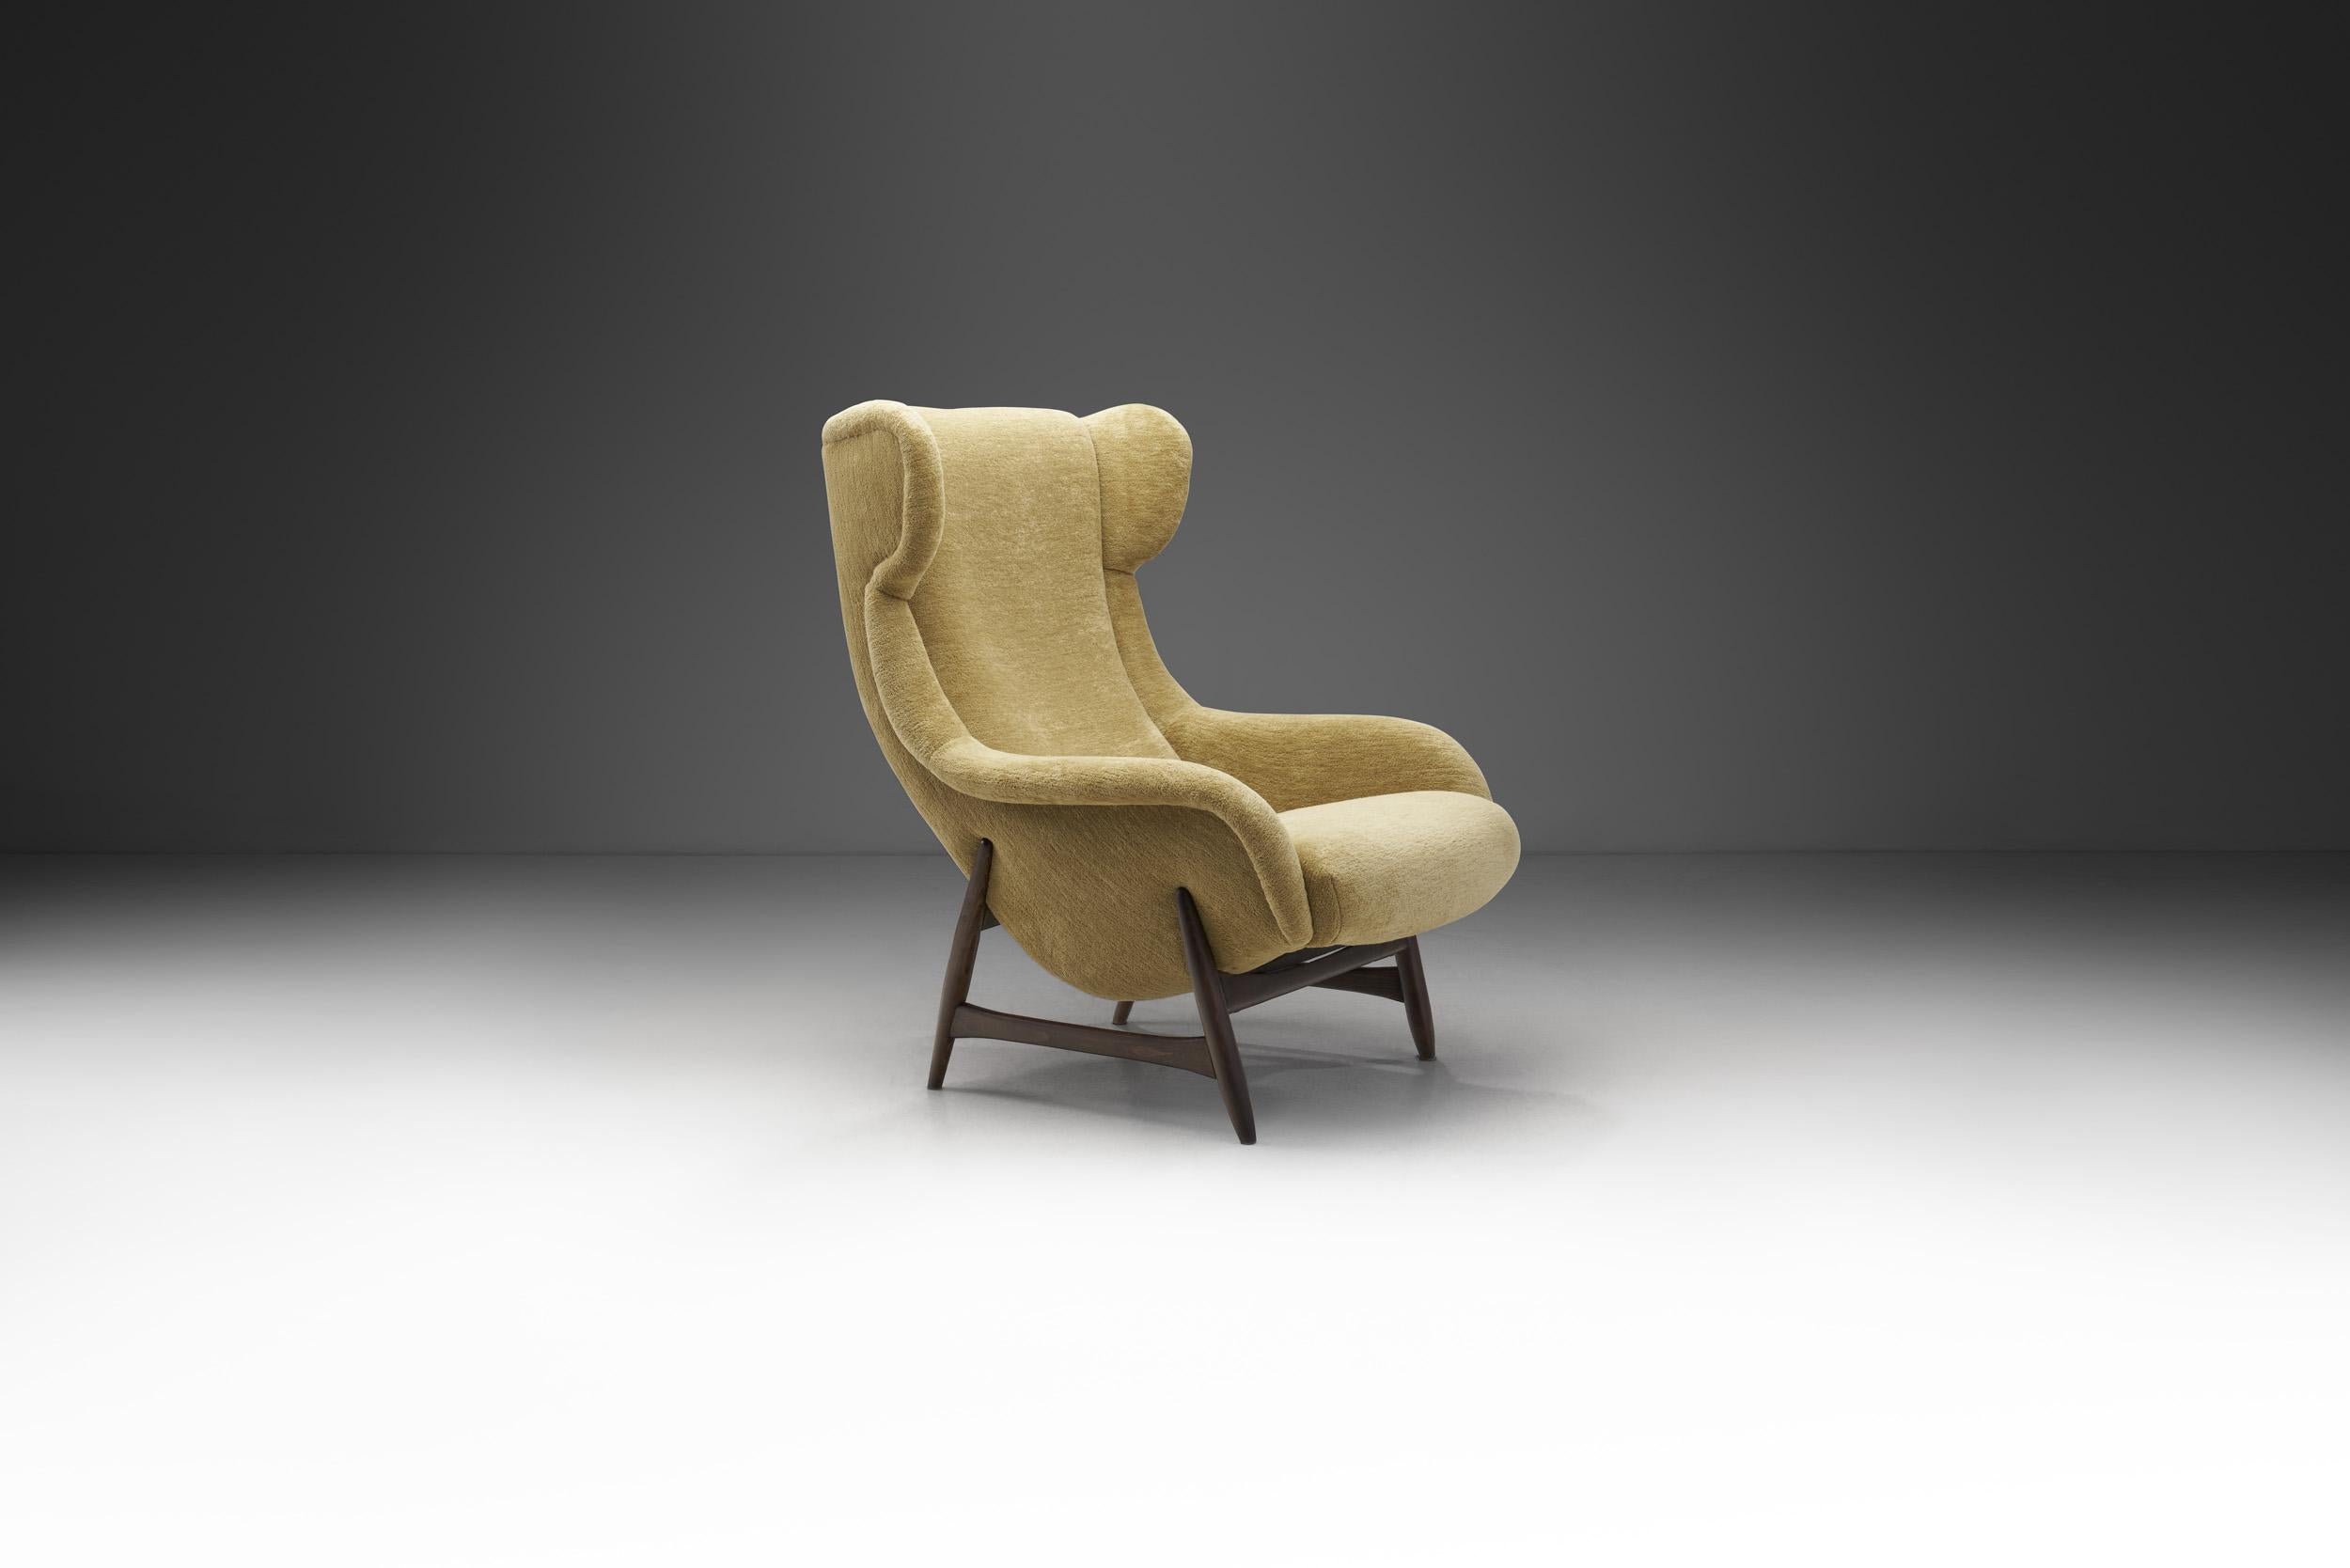 bengt ruda’s limited-edition cavelli chair